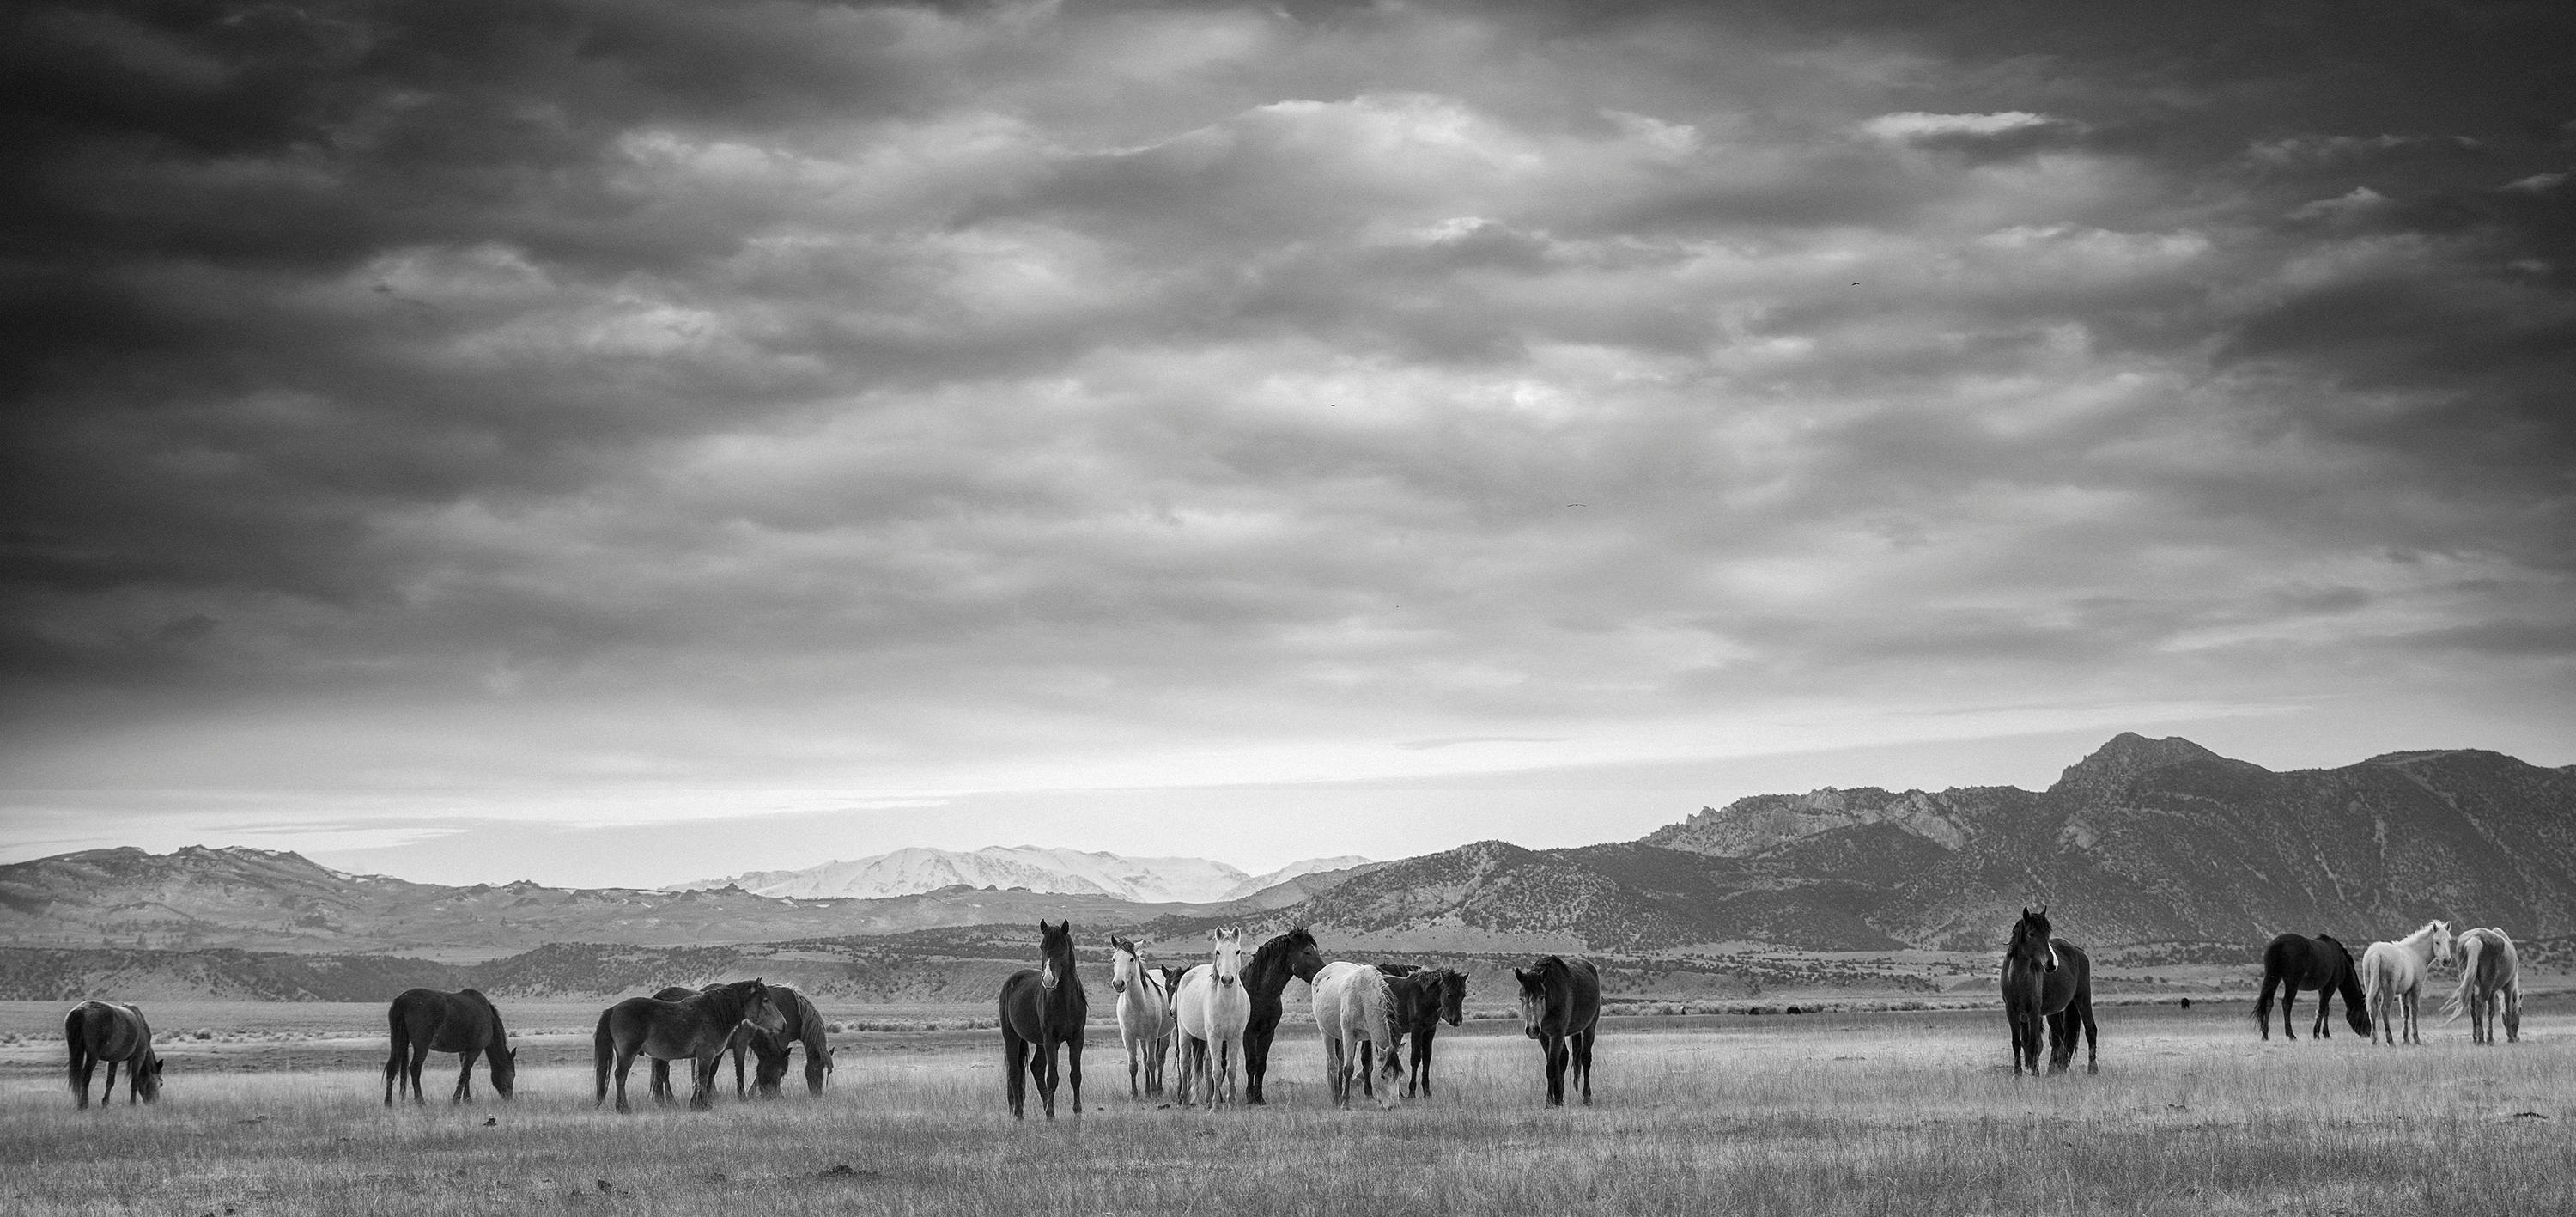 "Gangs All Here" - 40x25 Wild Horse Photography Photograph Mustangs Landscape